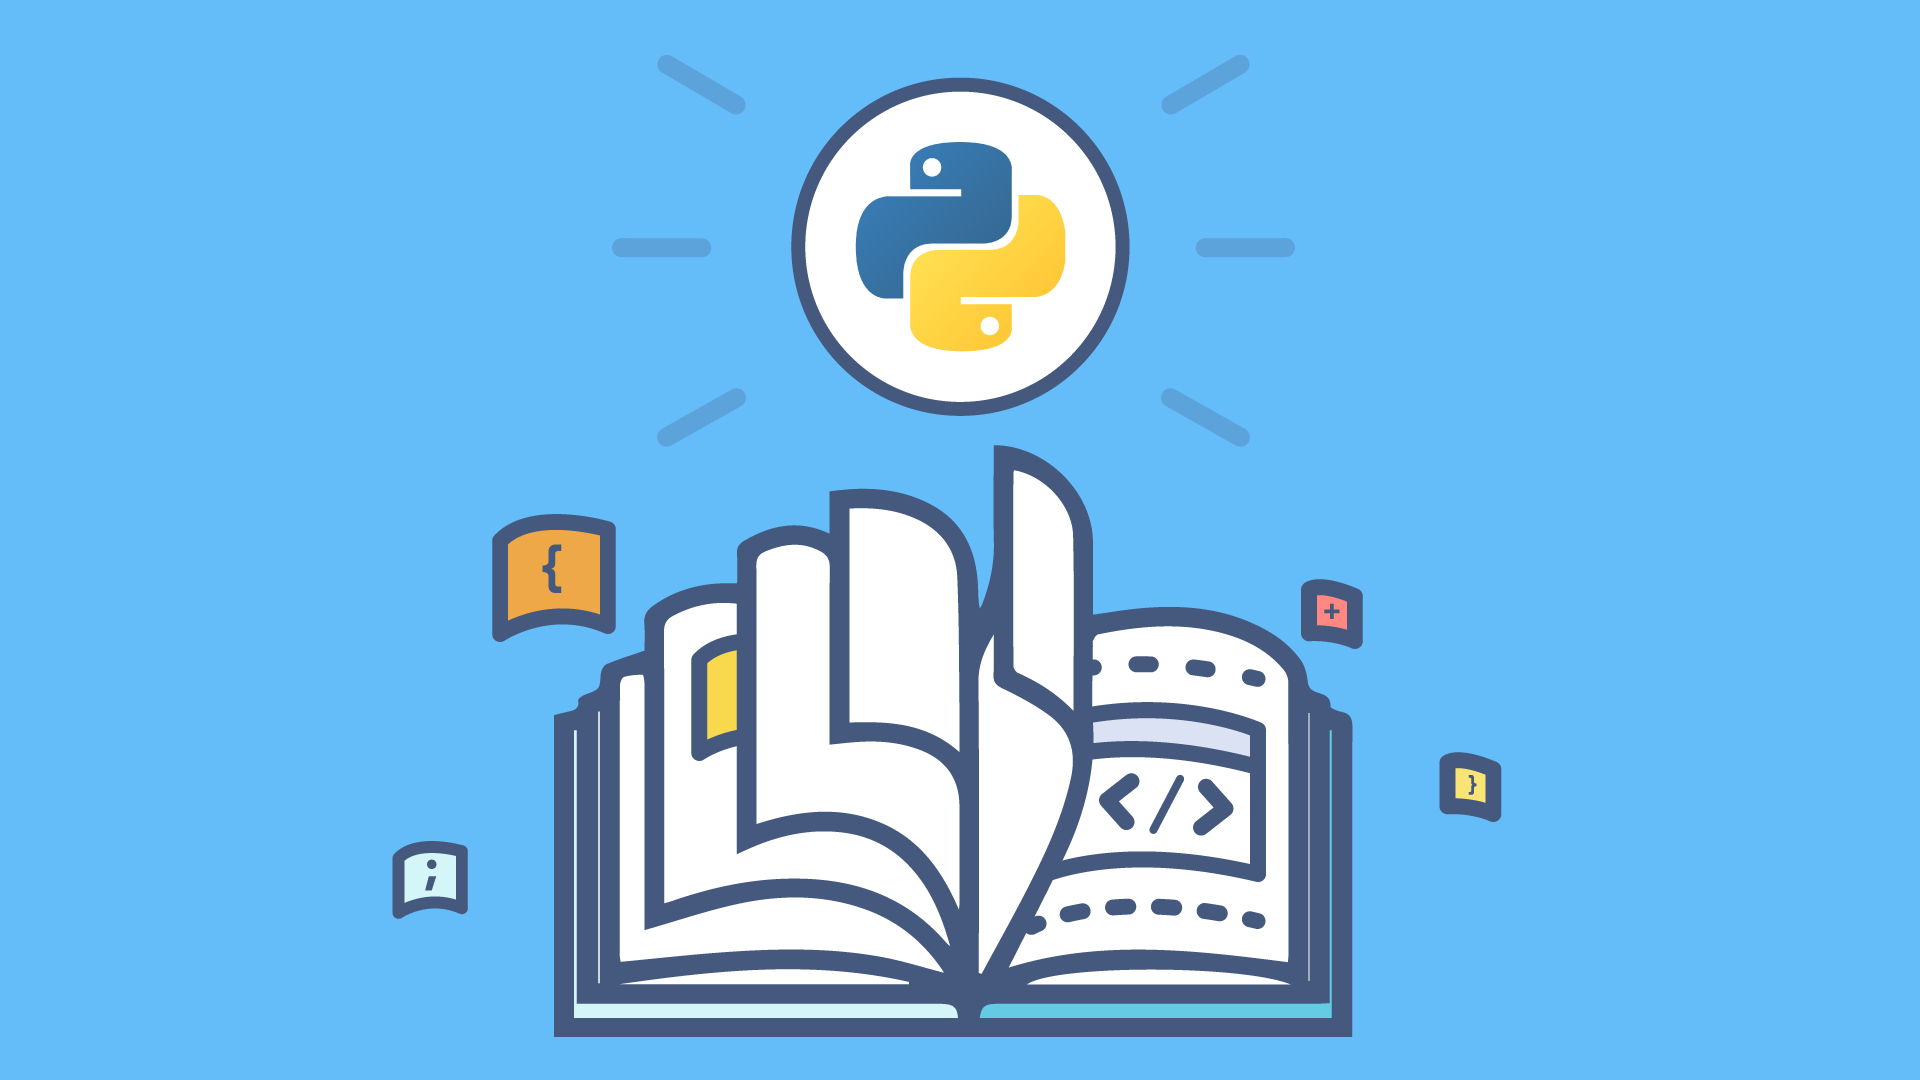 Getting Started With Python SEO